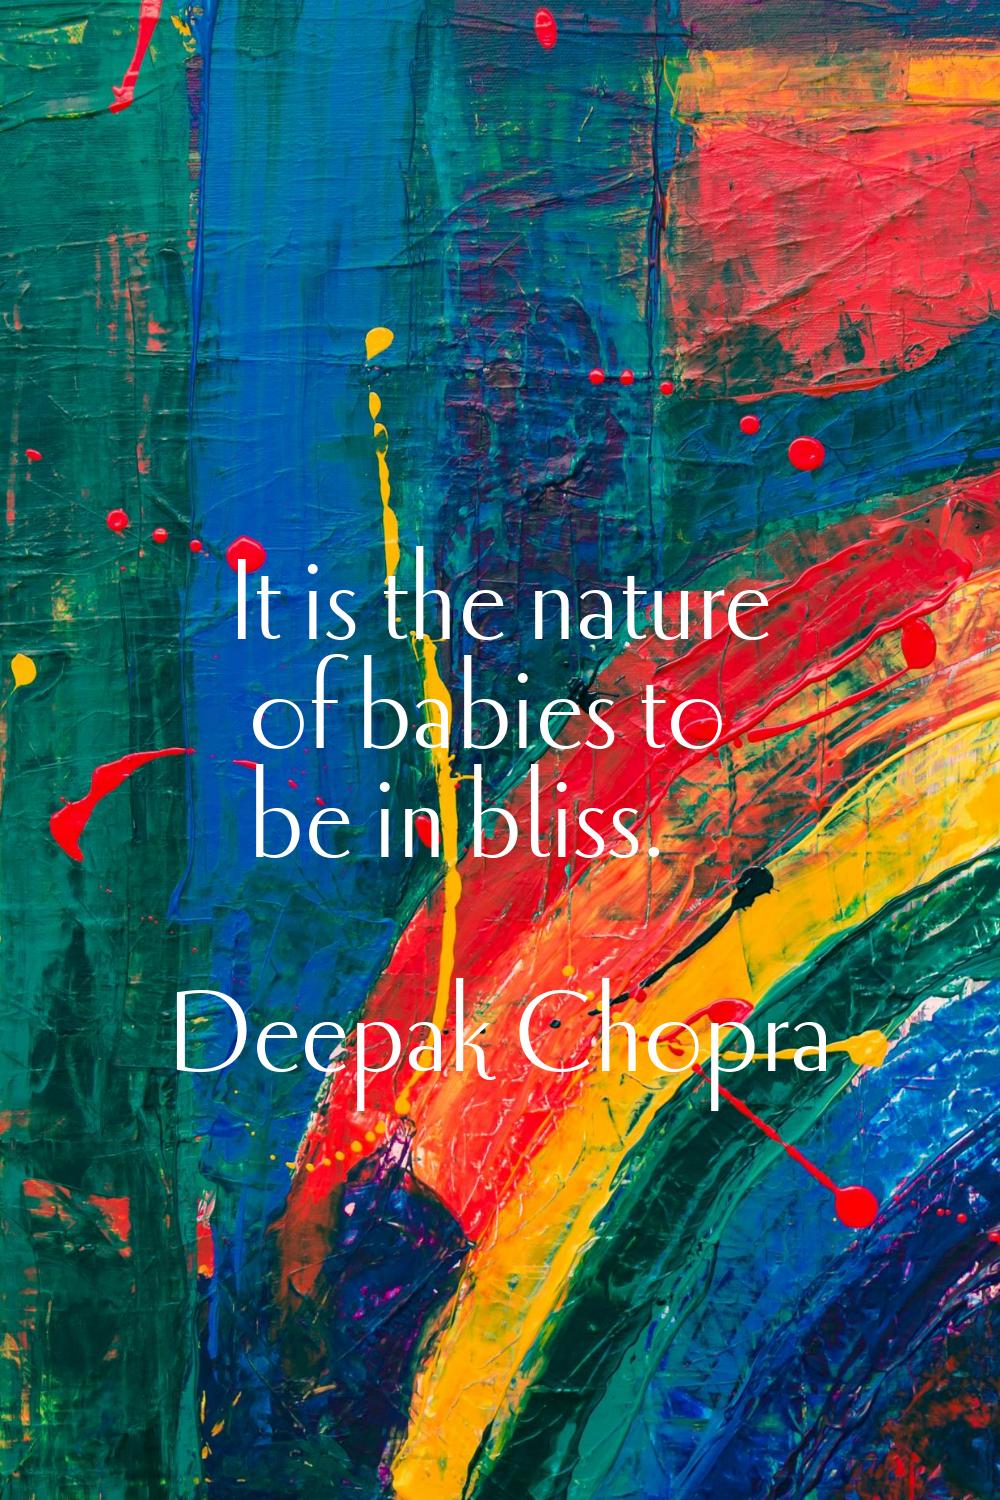 It is the nature of babies to be in bliss.